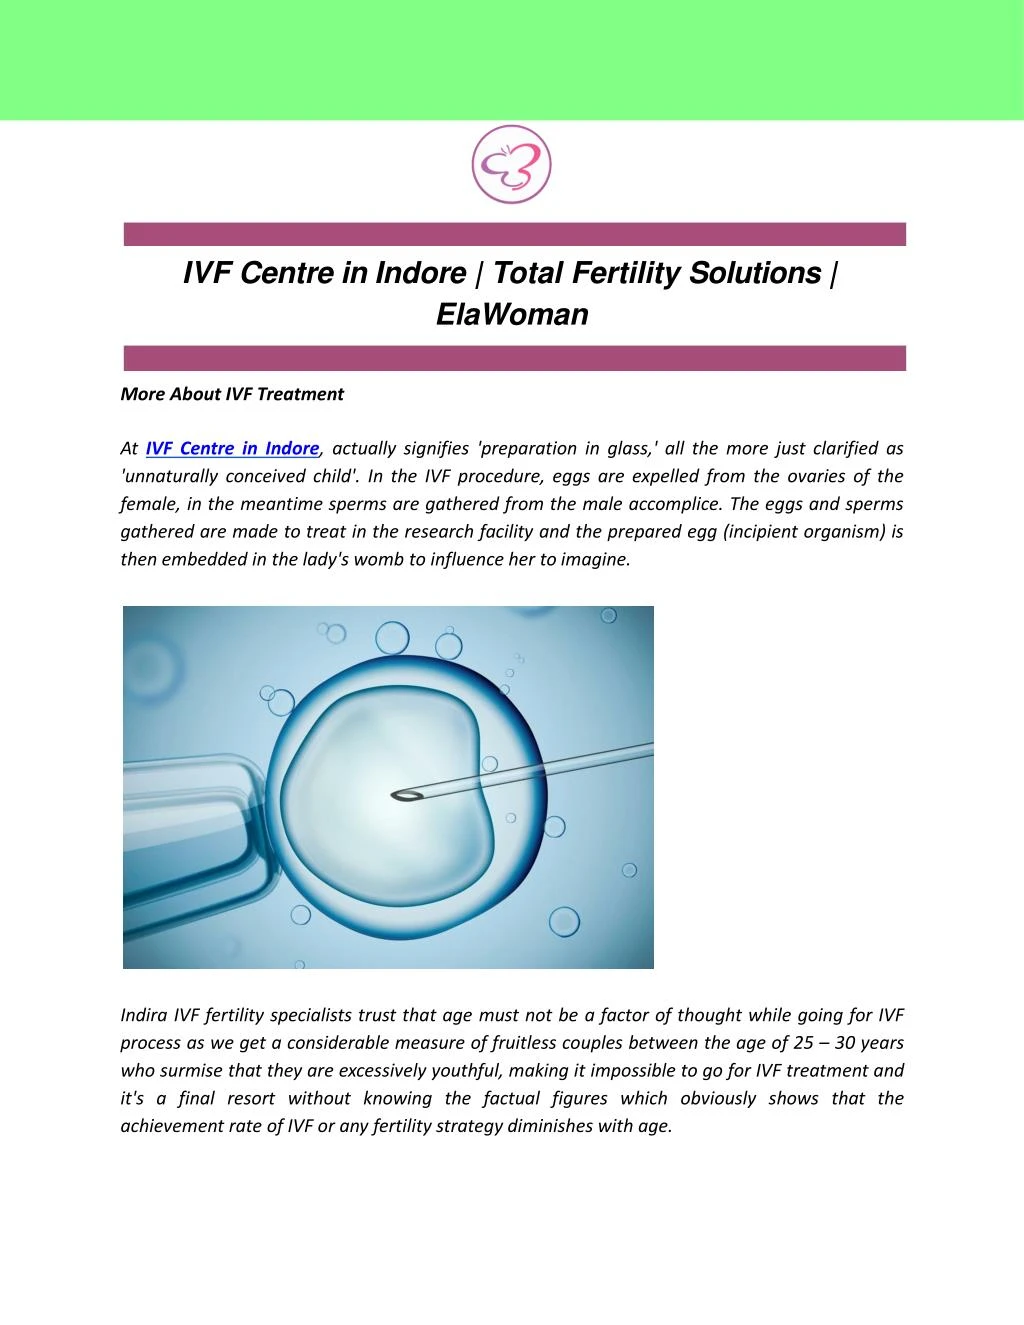 ivf centre in indore total fertility solutions